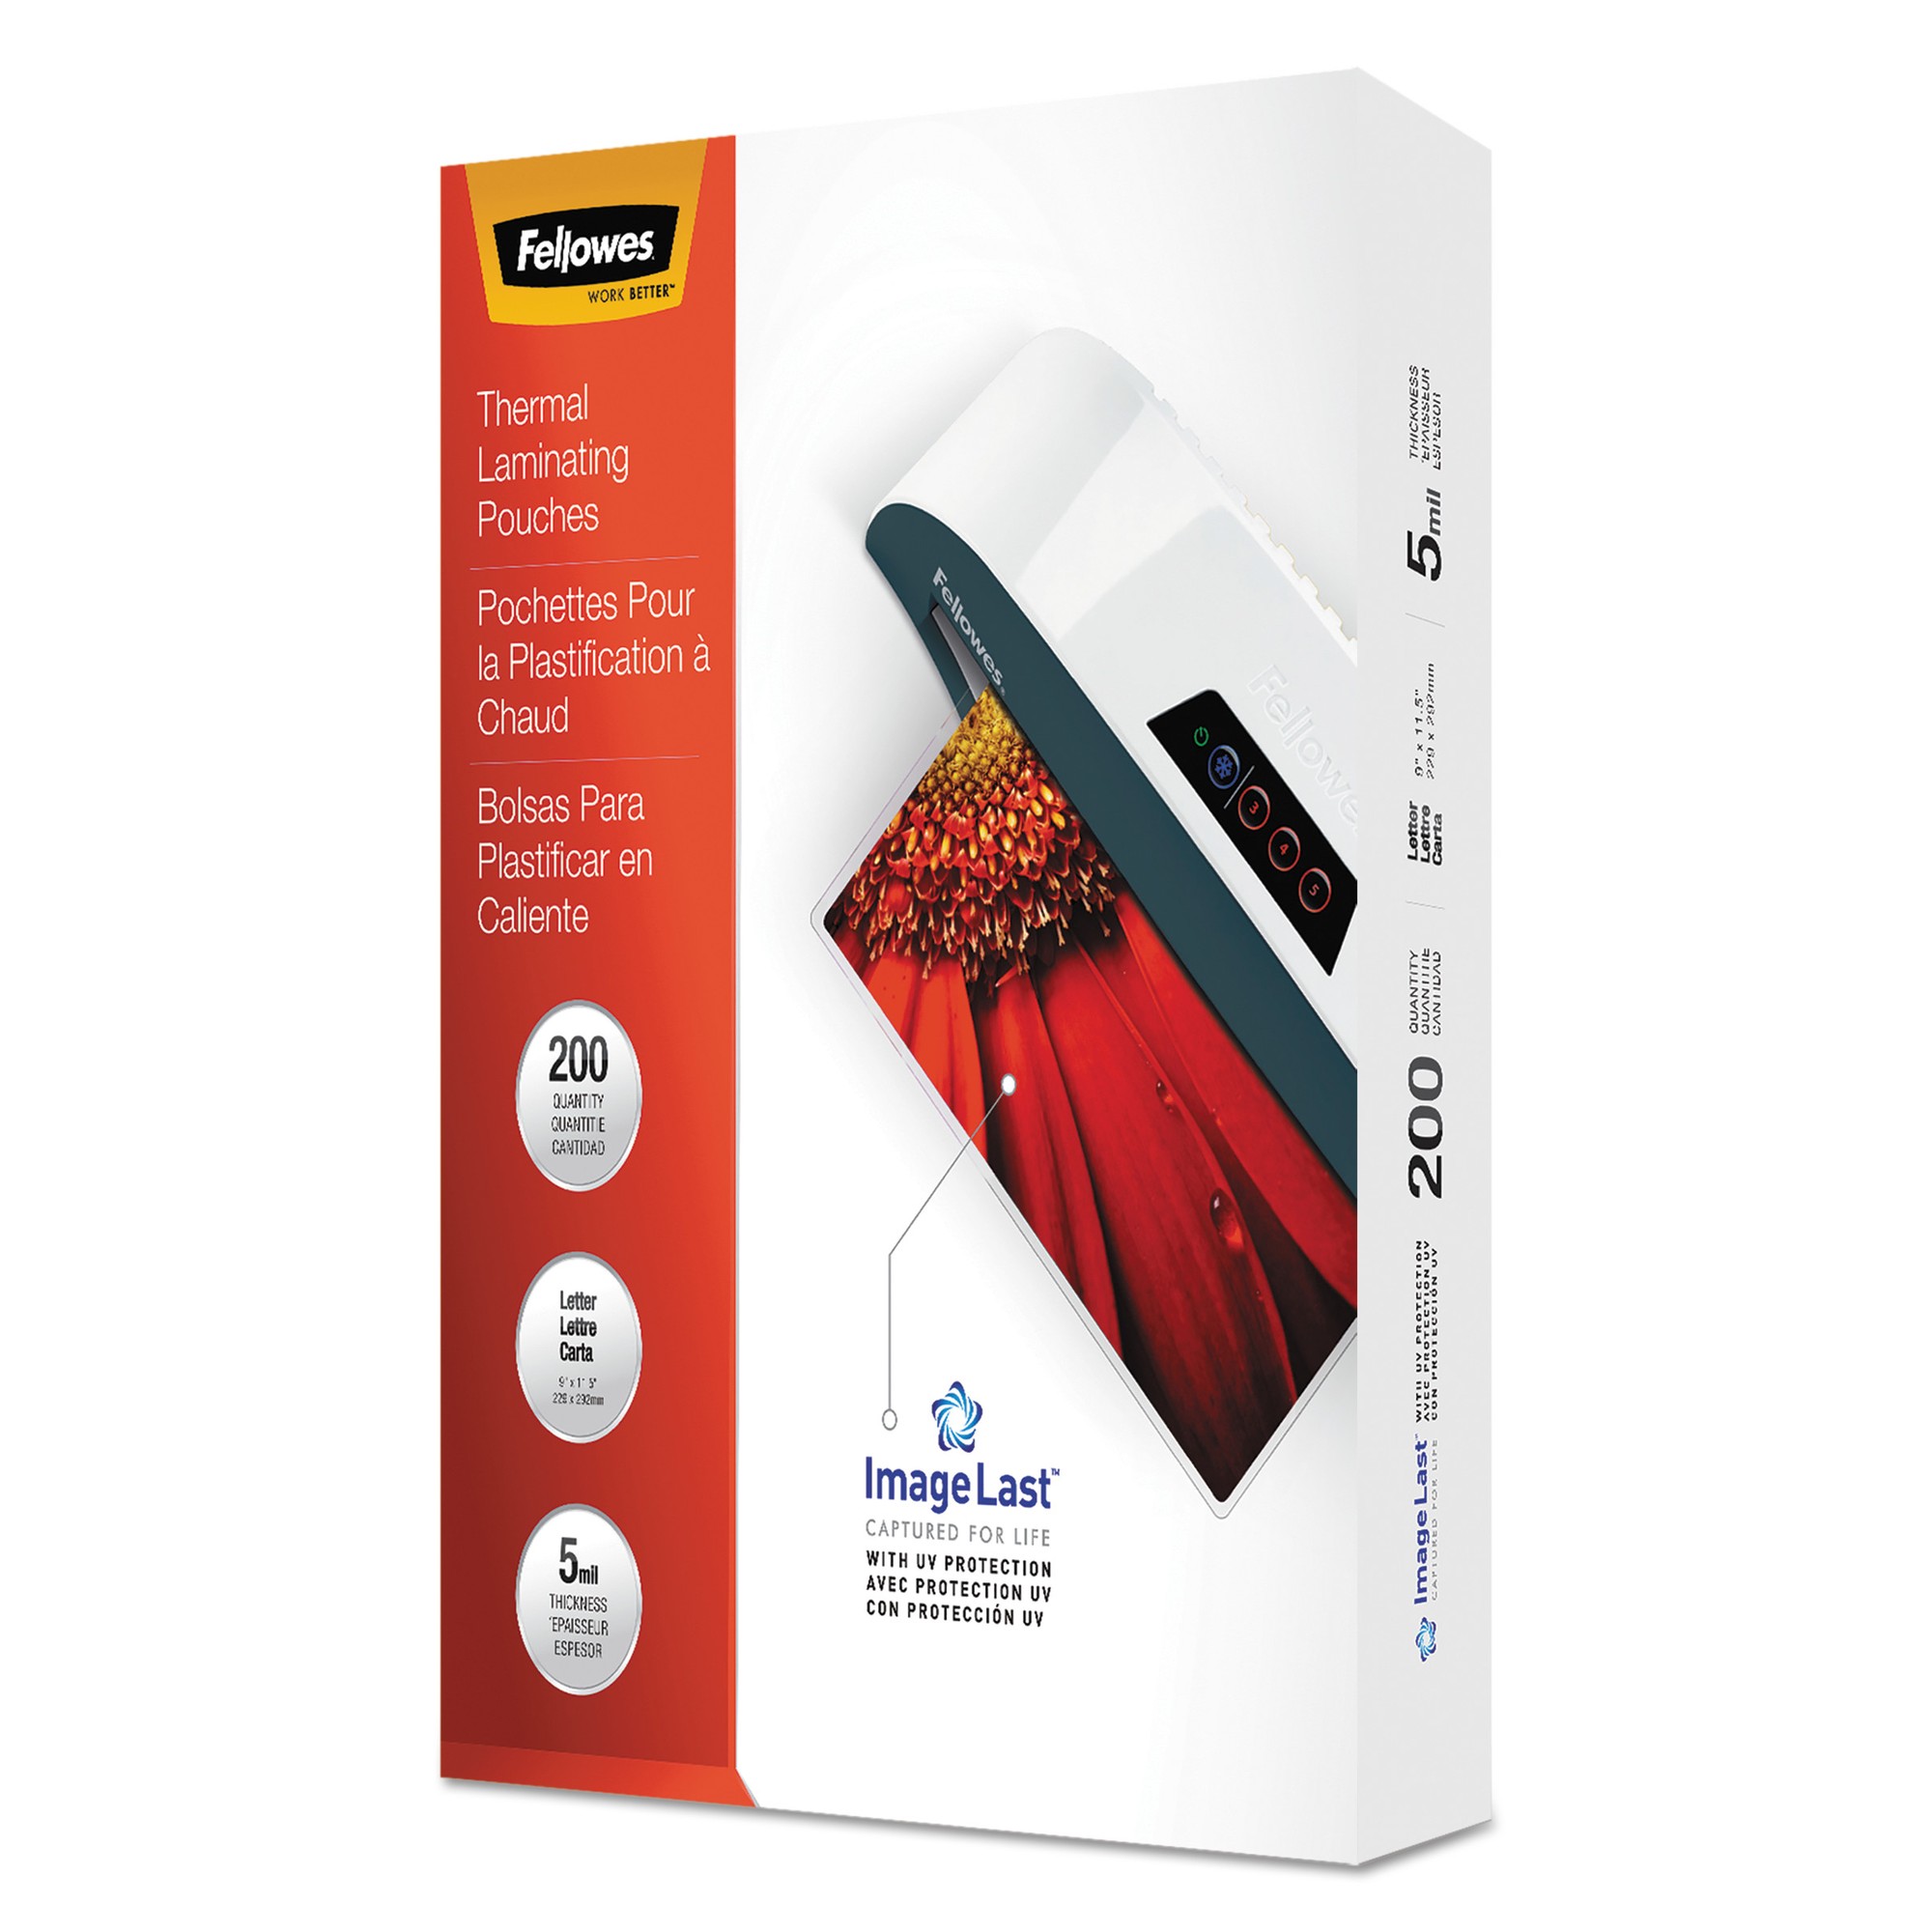 Fellowes ImageLast Jam-Free Thermal Laminating Pouches - Laminating Pouch/Sheet Size: 9" Width x 5 mil Thickness - UV Resistant